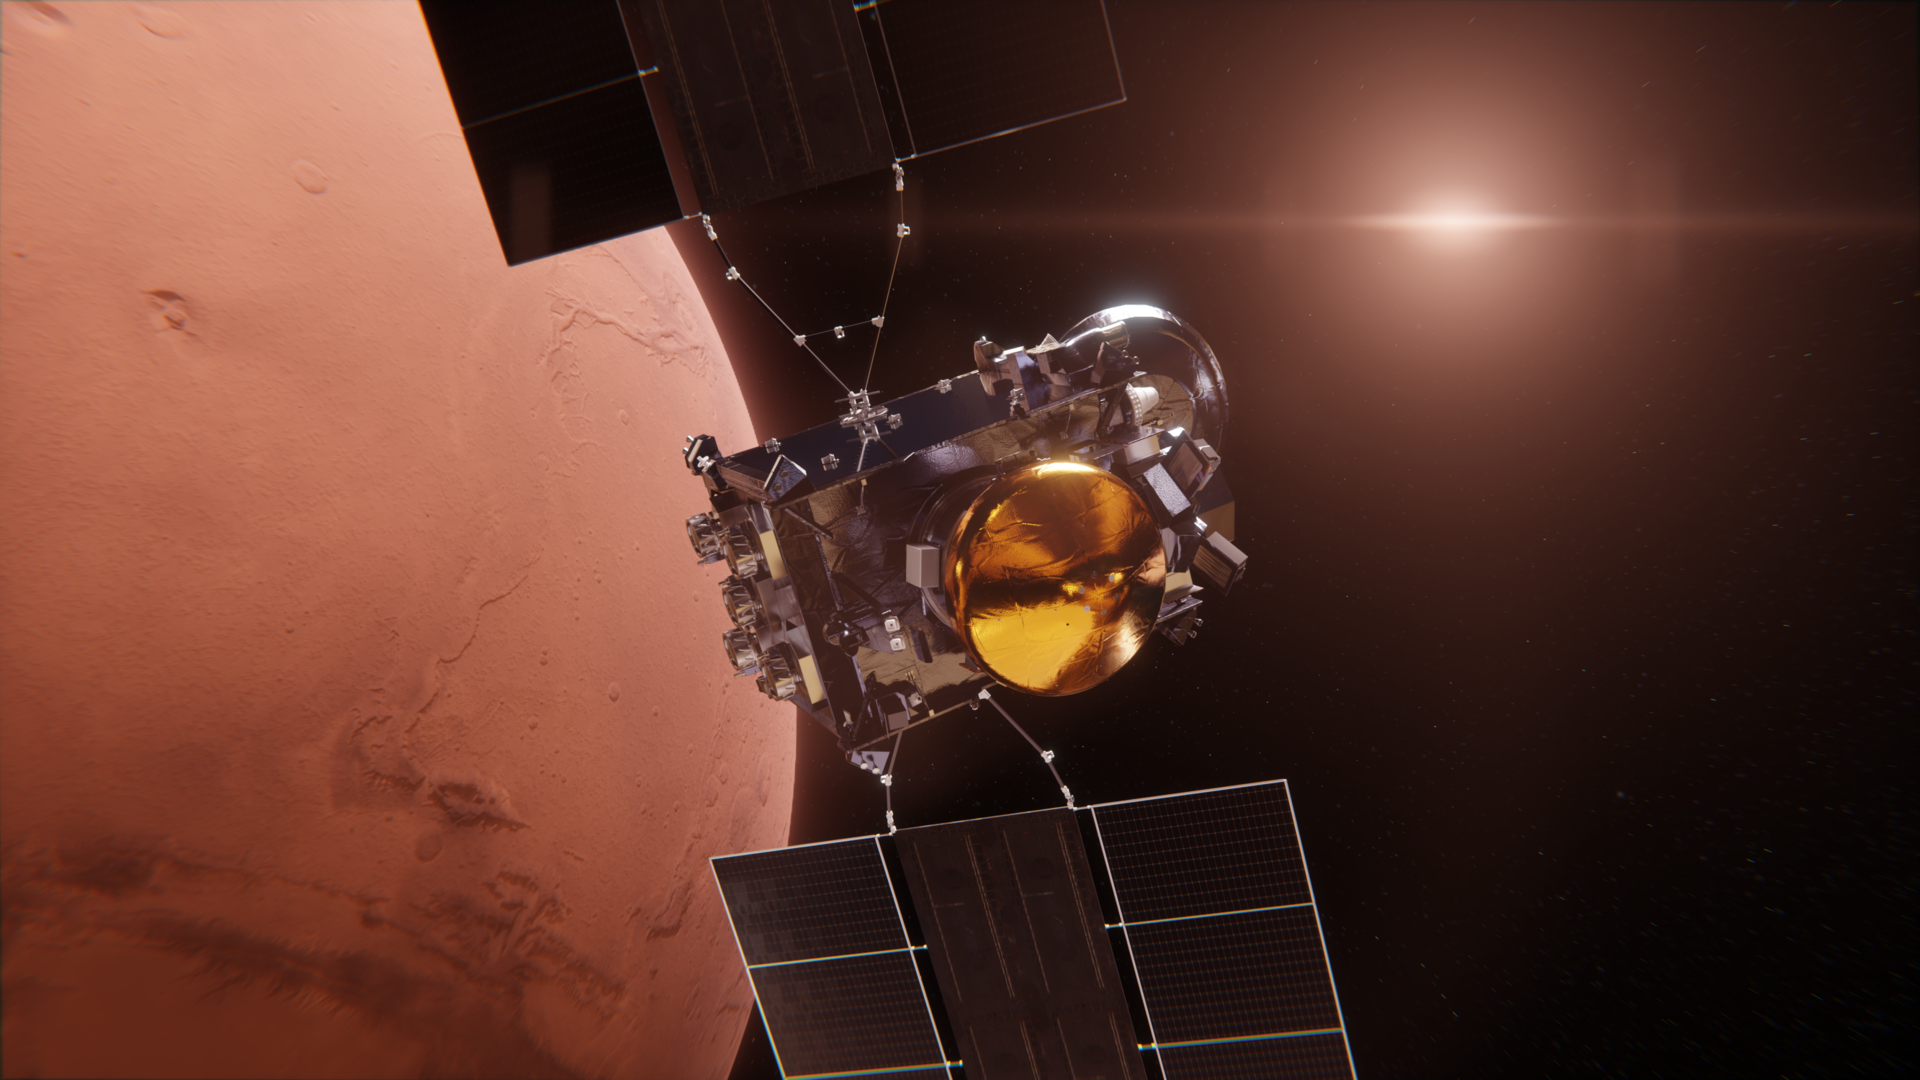 Europe is preparing for a flight to Mars: experts have approved the design of the ERO spacecraft